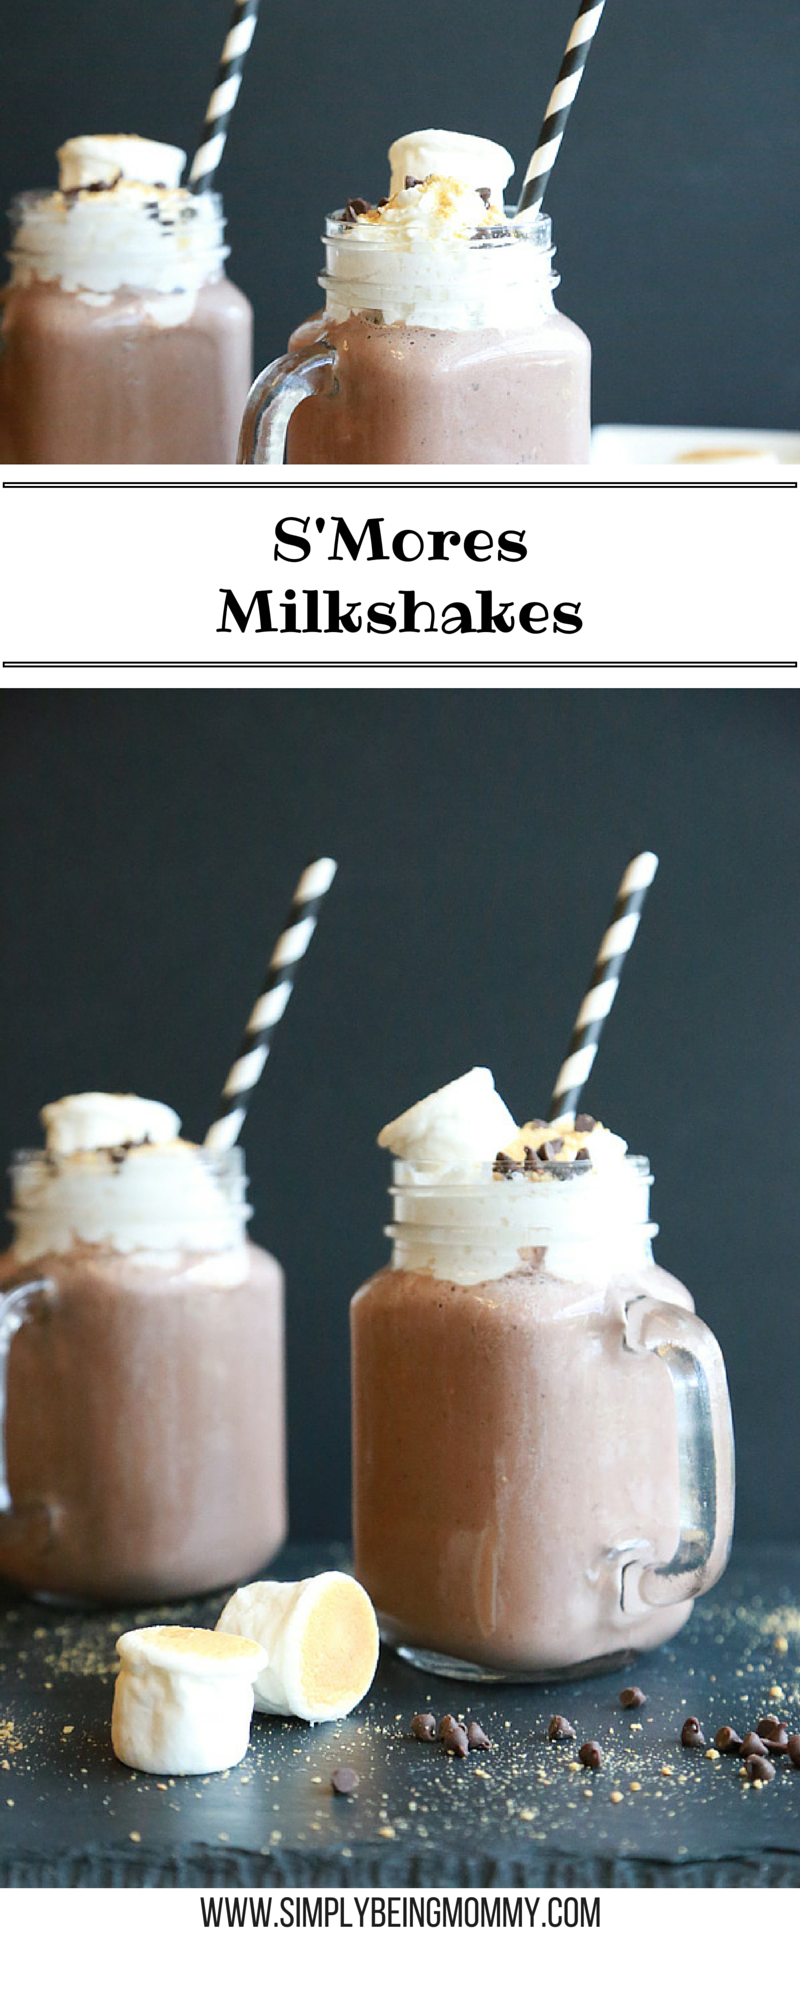 Cool down this summer with these S'Mores Milkshakes. With minimal ingredients & time you can make this tasty treat perfect for those hot, blistery days.